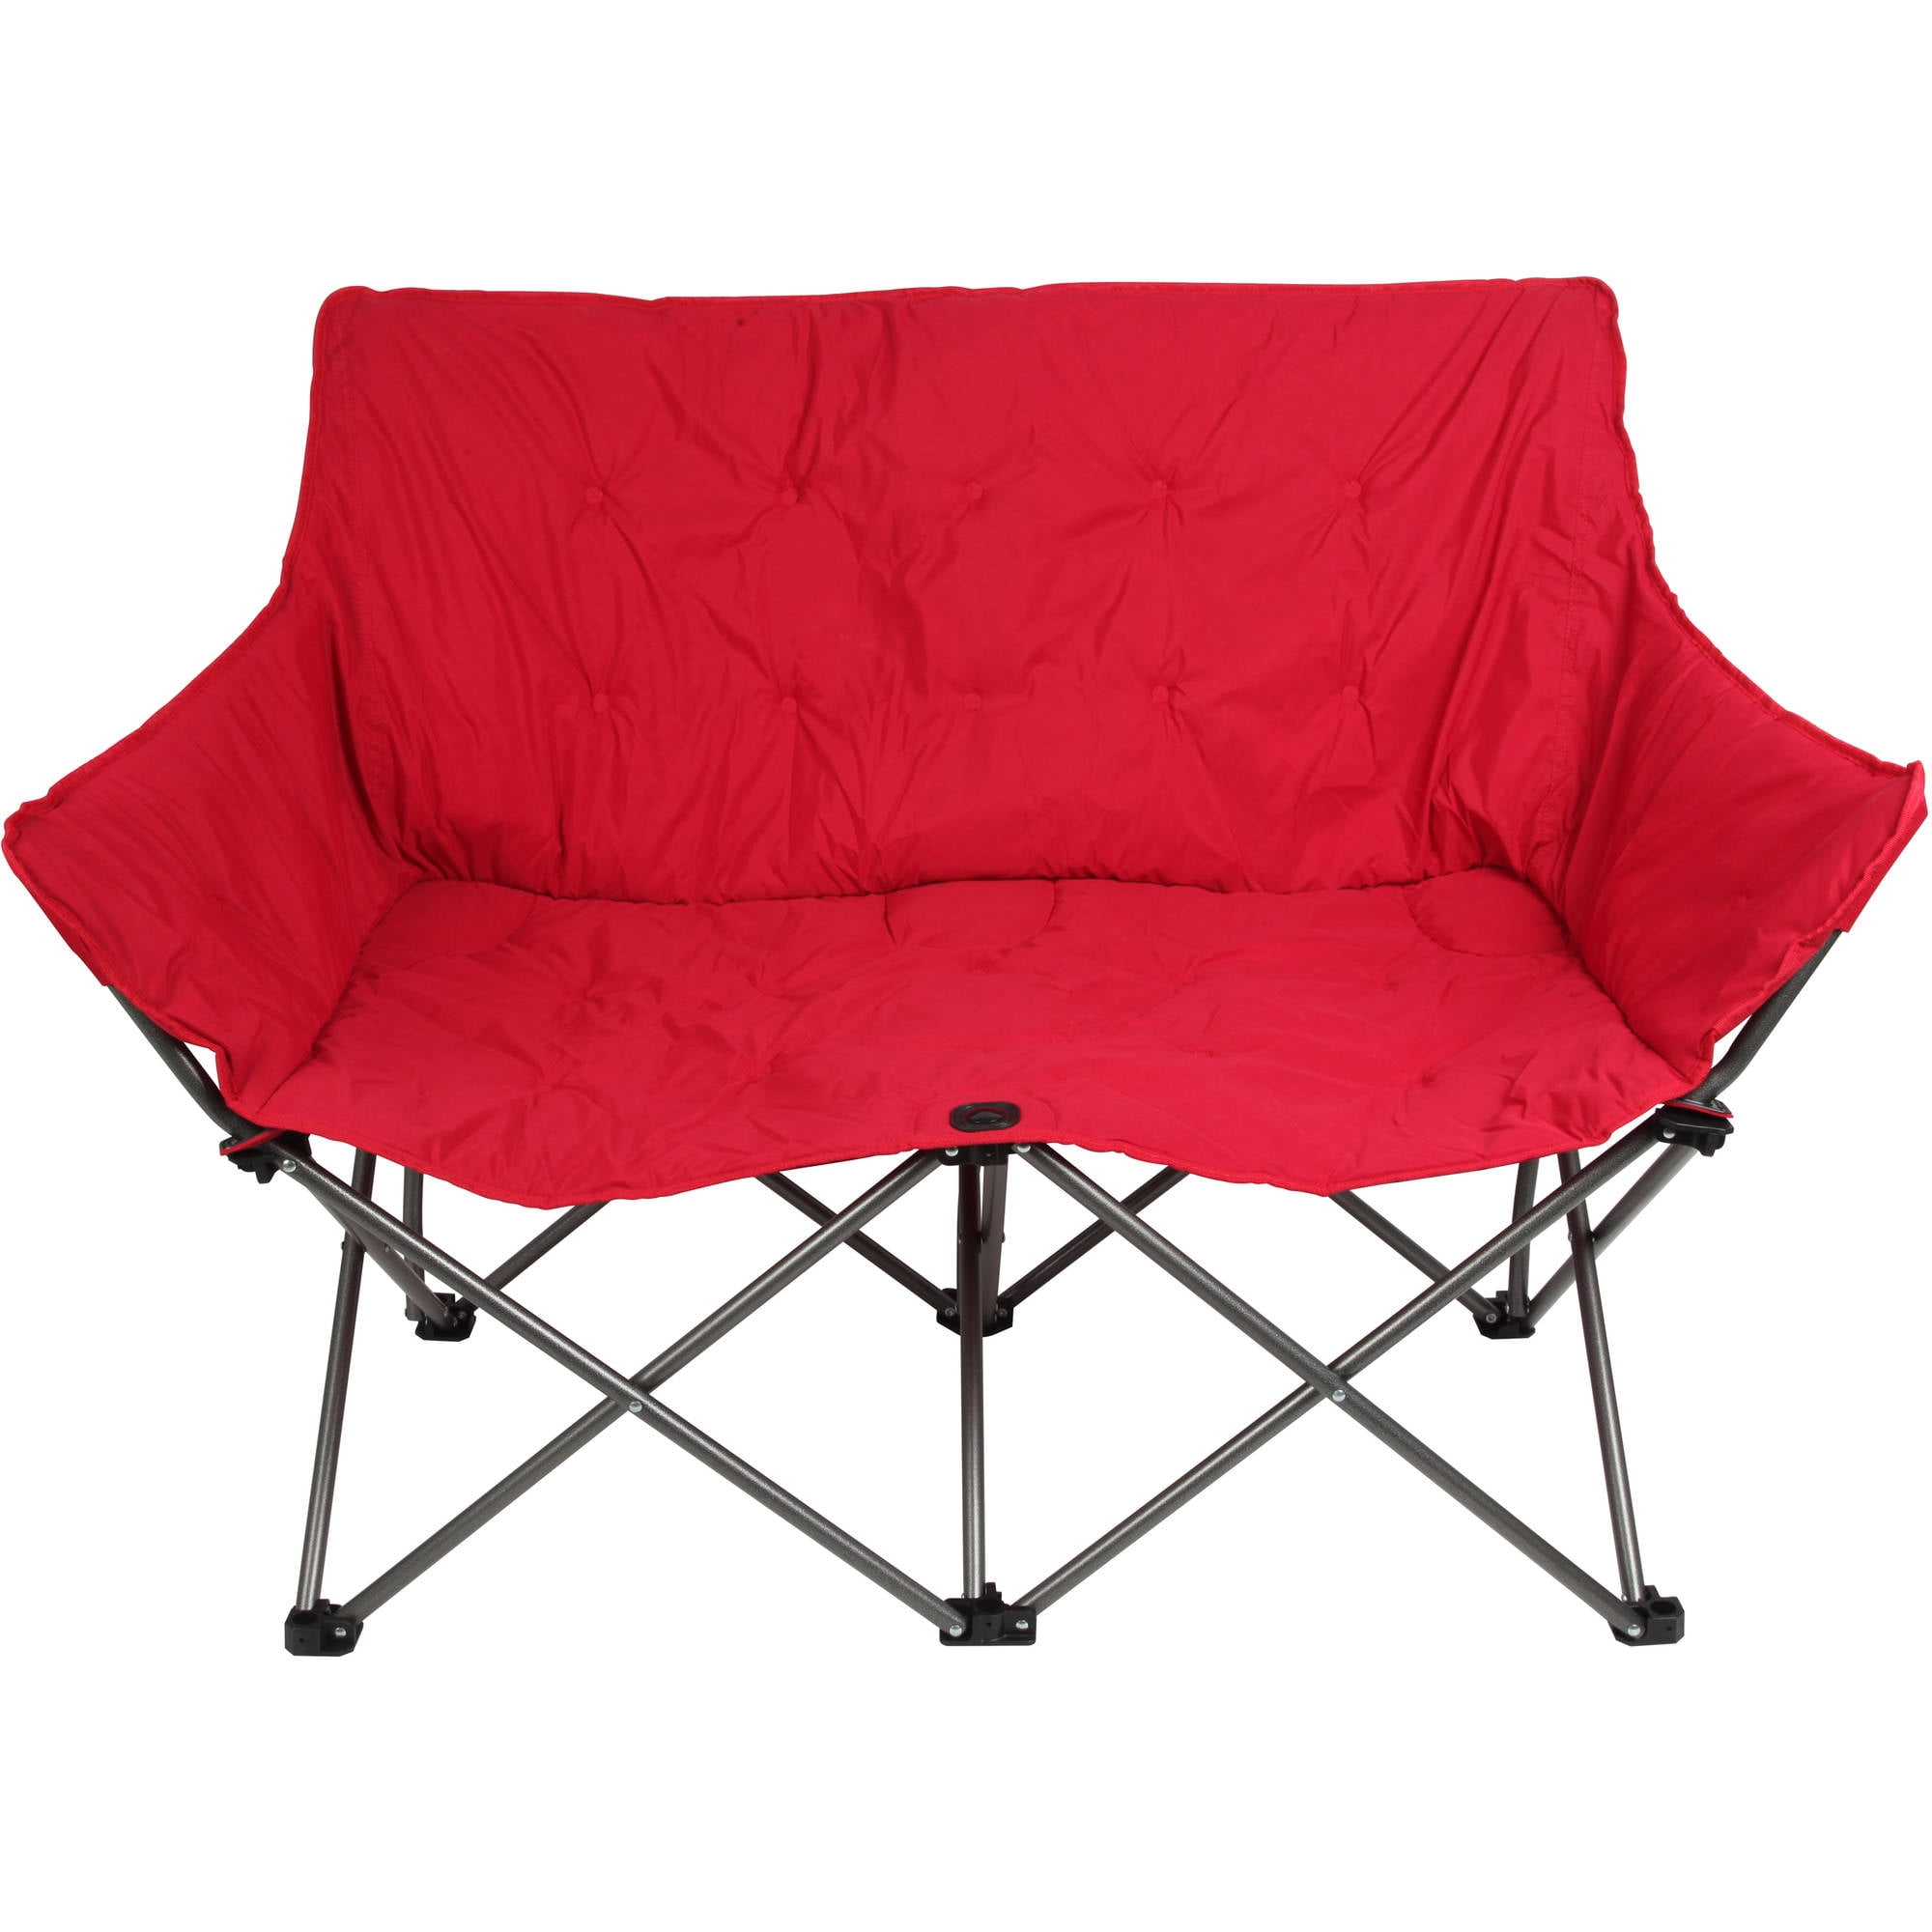 Ozark Trail Camping Love Seat Chair, Red, Adult Use, 15lbs